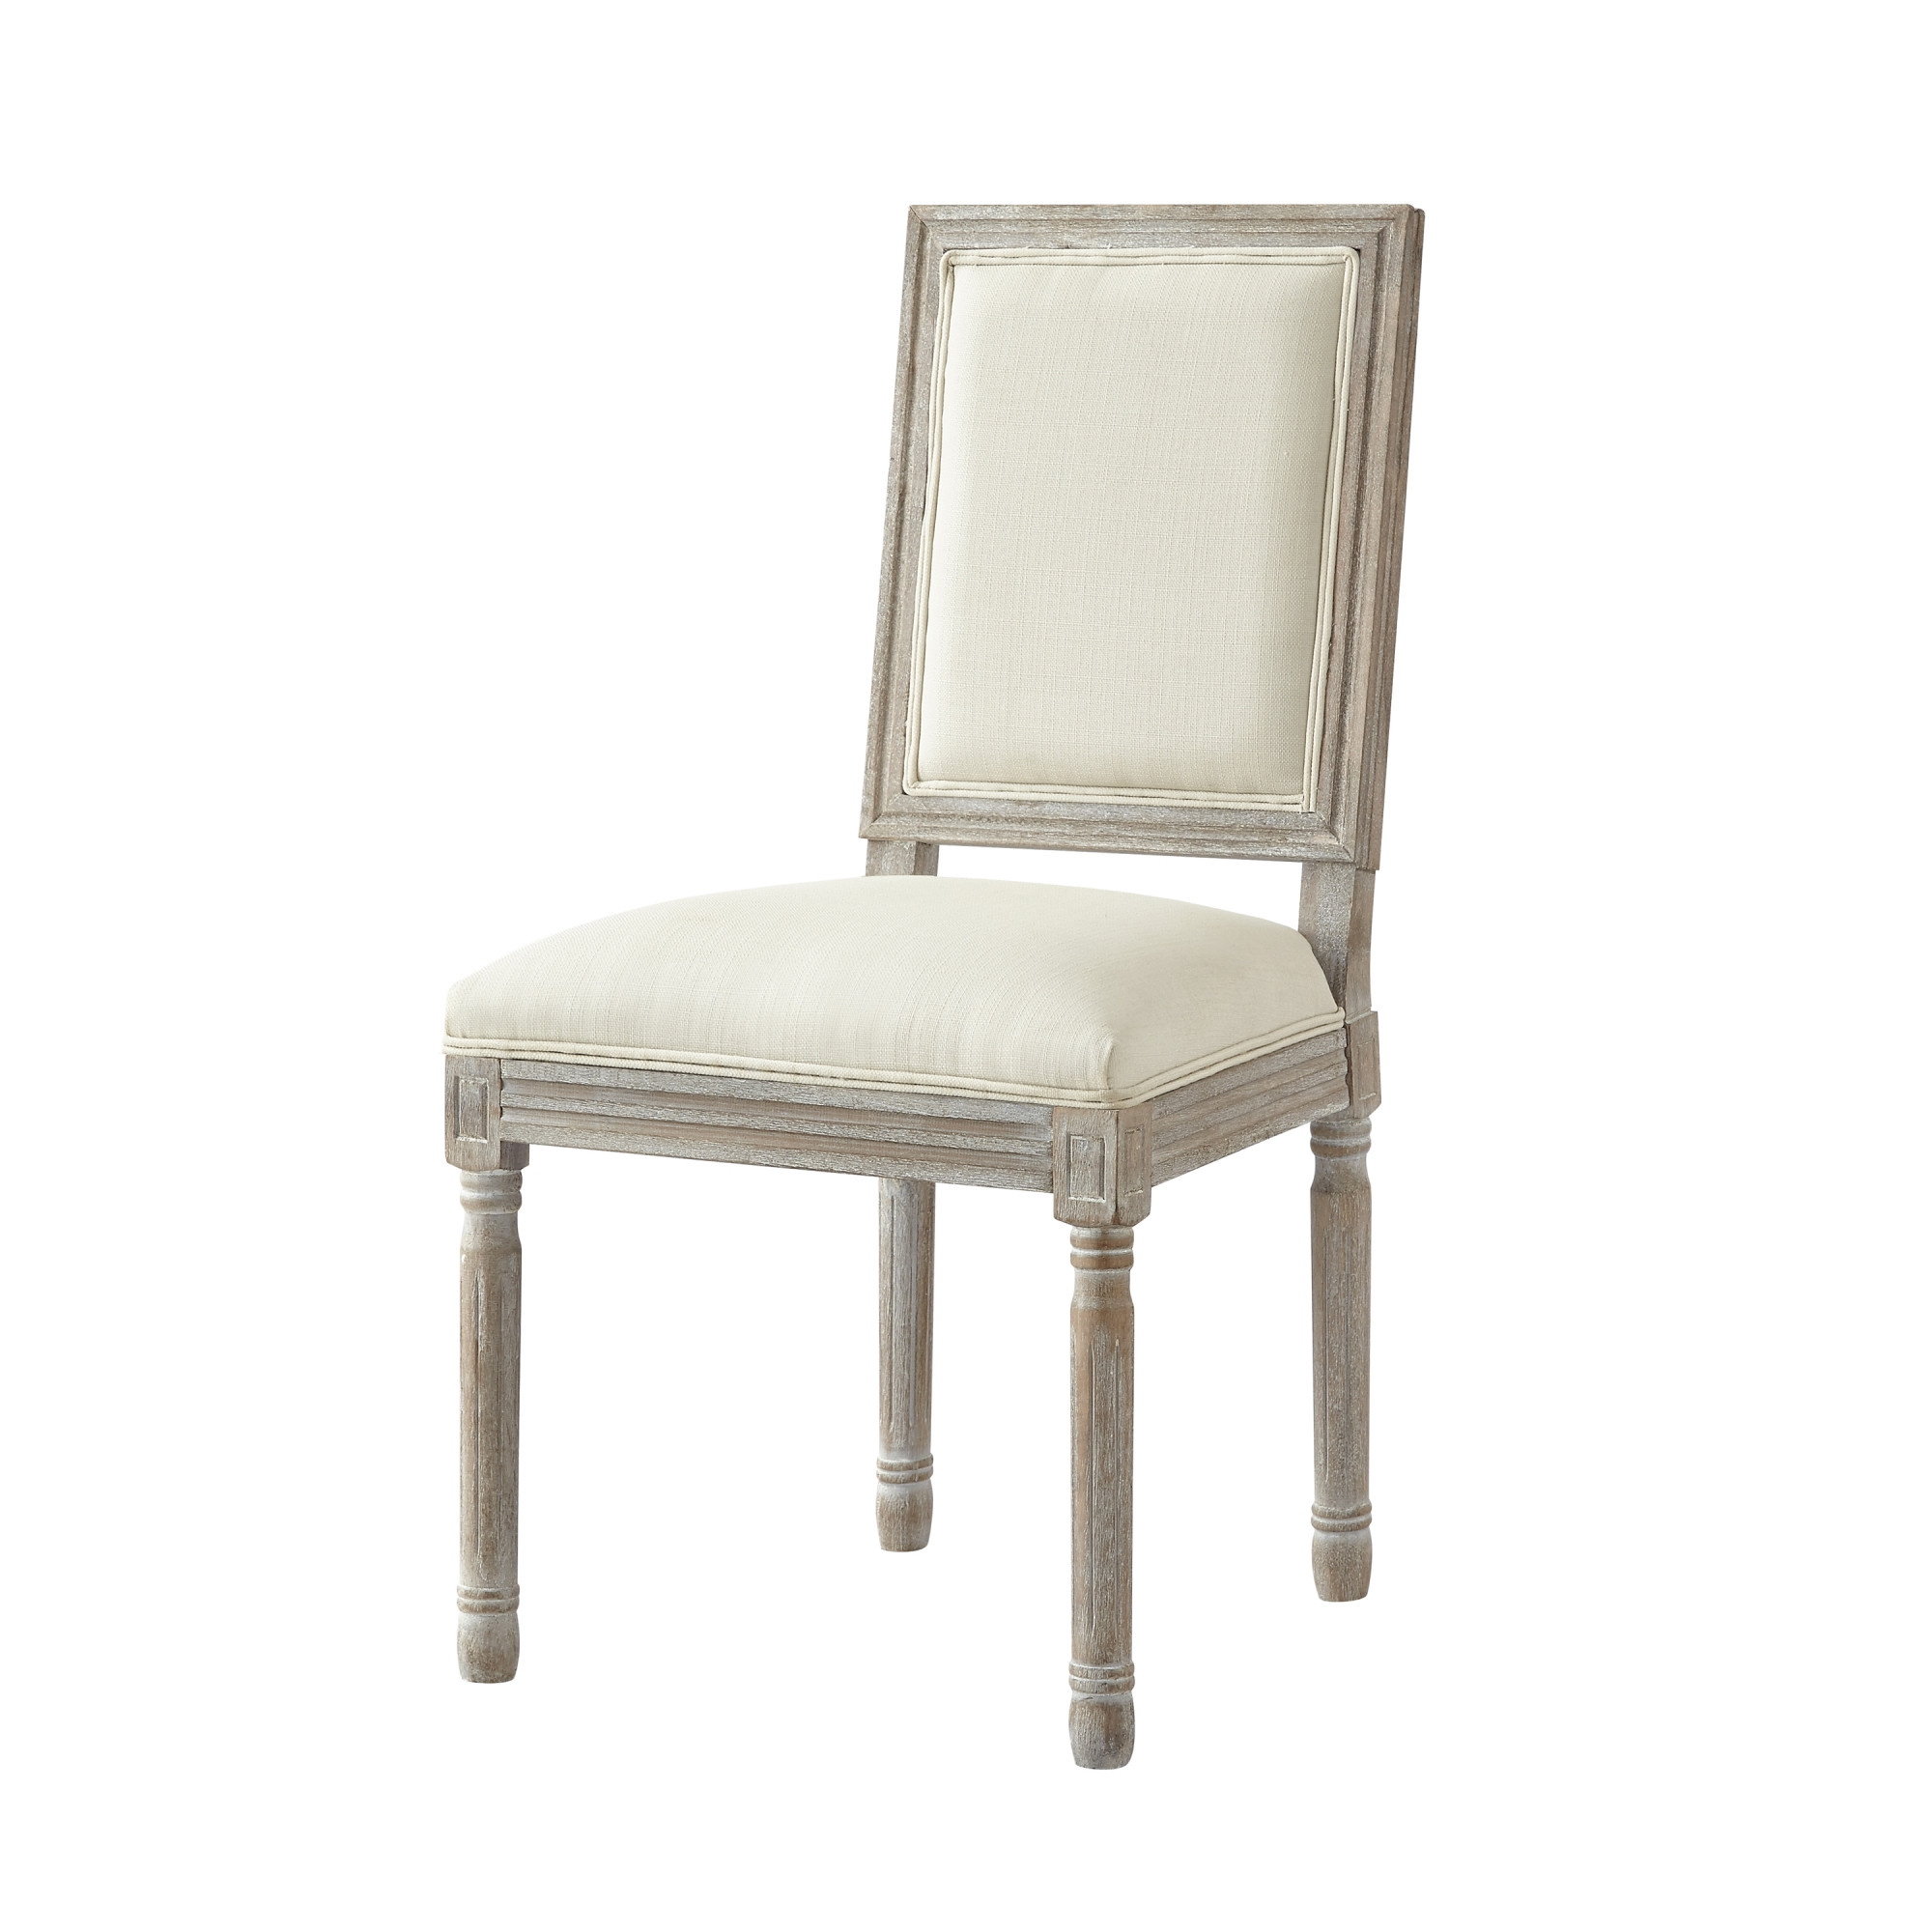 Set of Two Cream and Brown Upholstered Linen Dining Side Chairs-535363-1